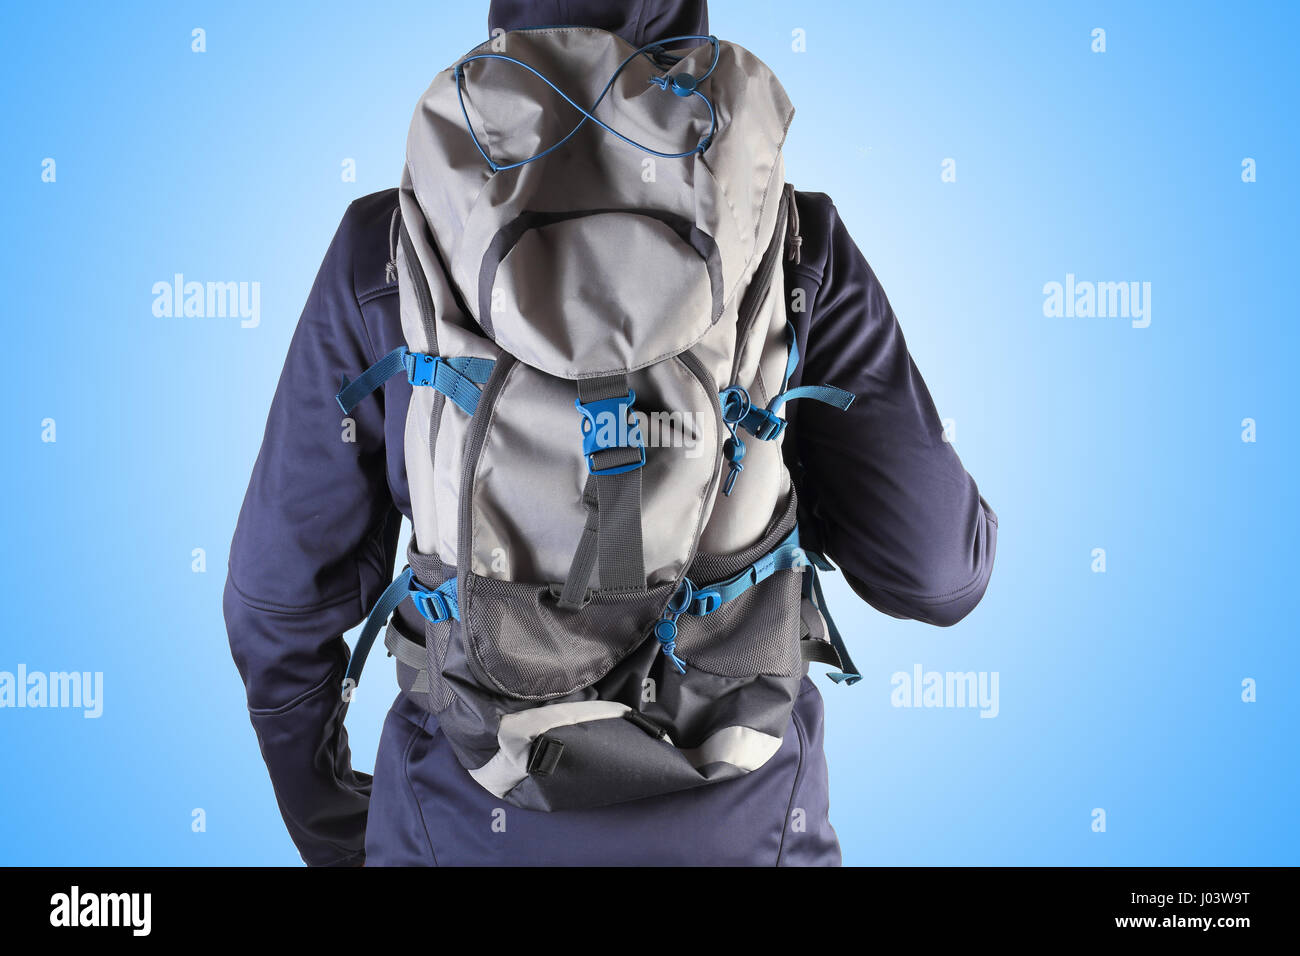 Hiker with backpack on blue background. New backpack on man back close-up. Excellent travel background. Stock Photo